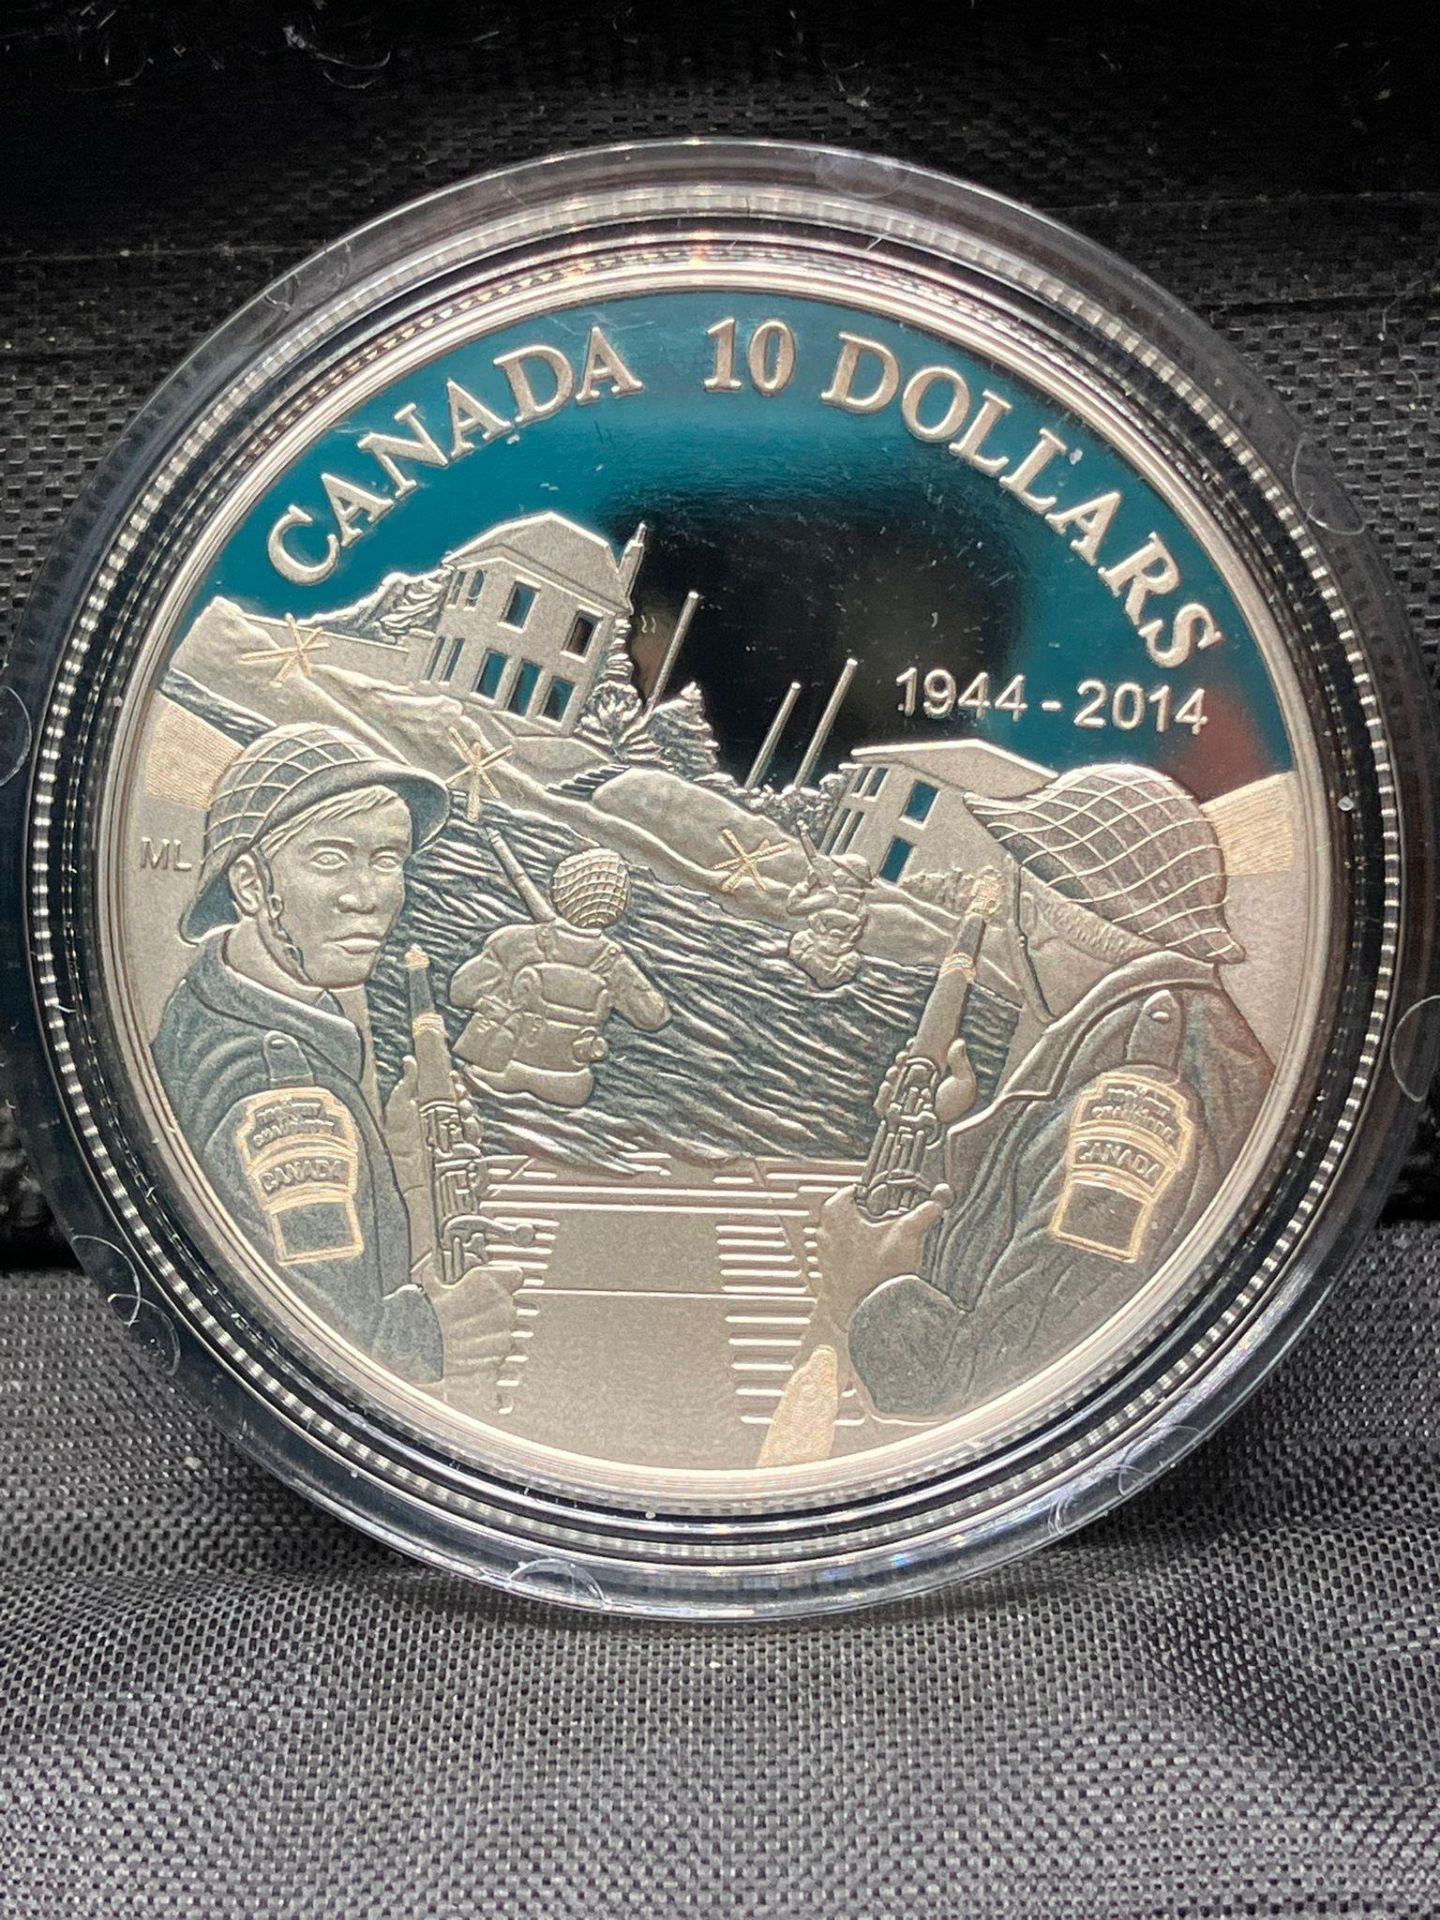 2014 CANADIAN D-DAY 10 DOLLAR COIN. Struck in PURE SILVER by the Royal Canadian Mint to - Image 7 of 7